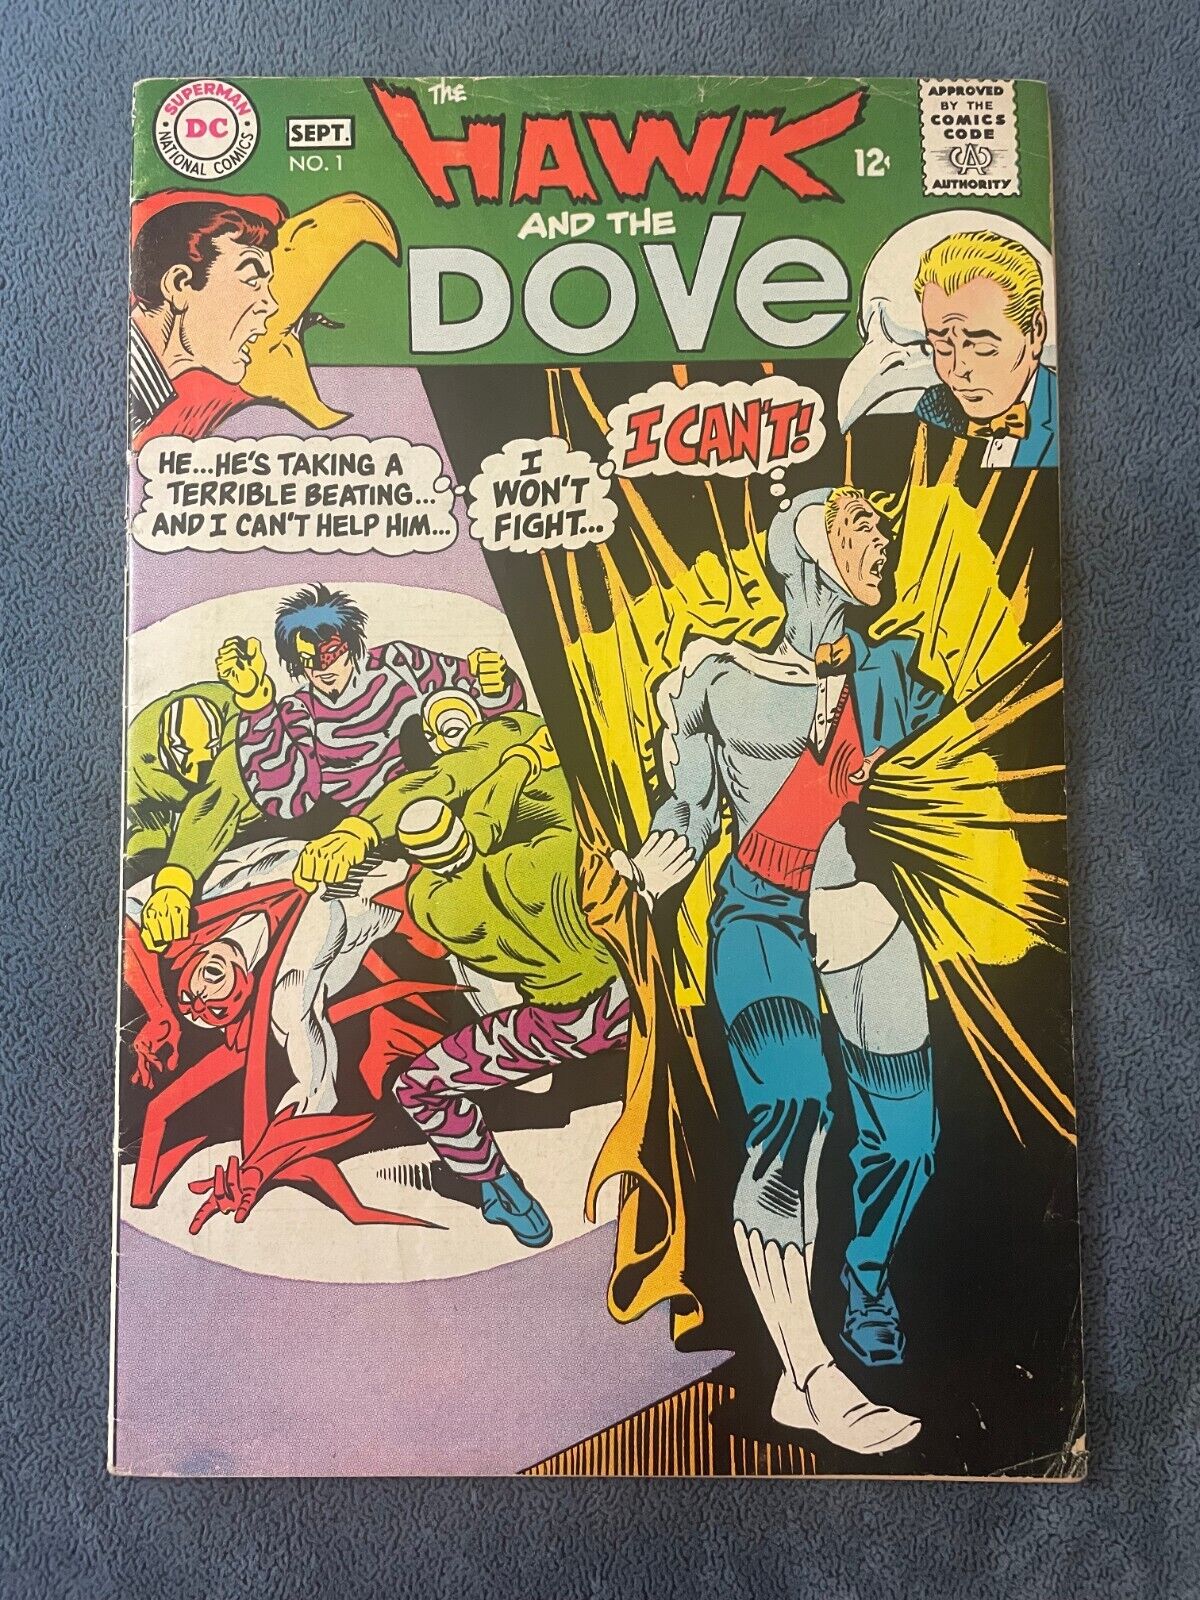 The Hawk And The Dove #1 1986 DC Comic Vintage Steve Ditko Cover Art VG/FN